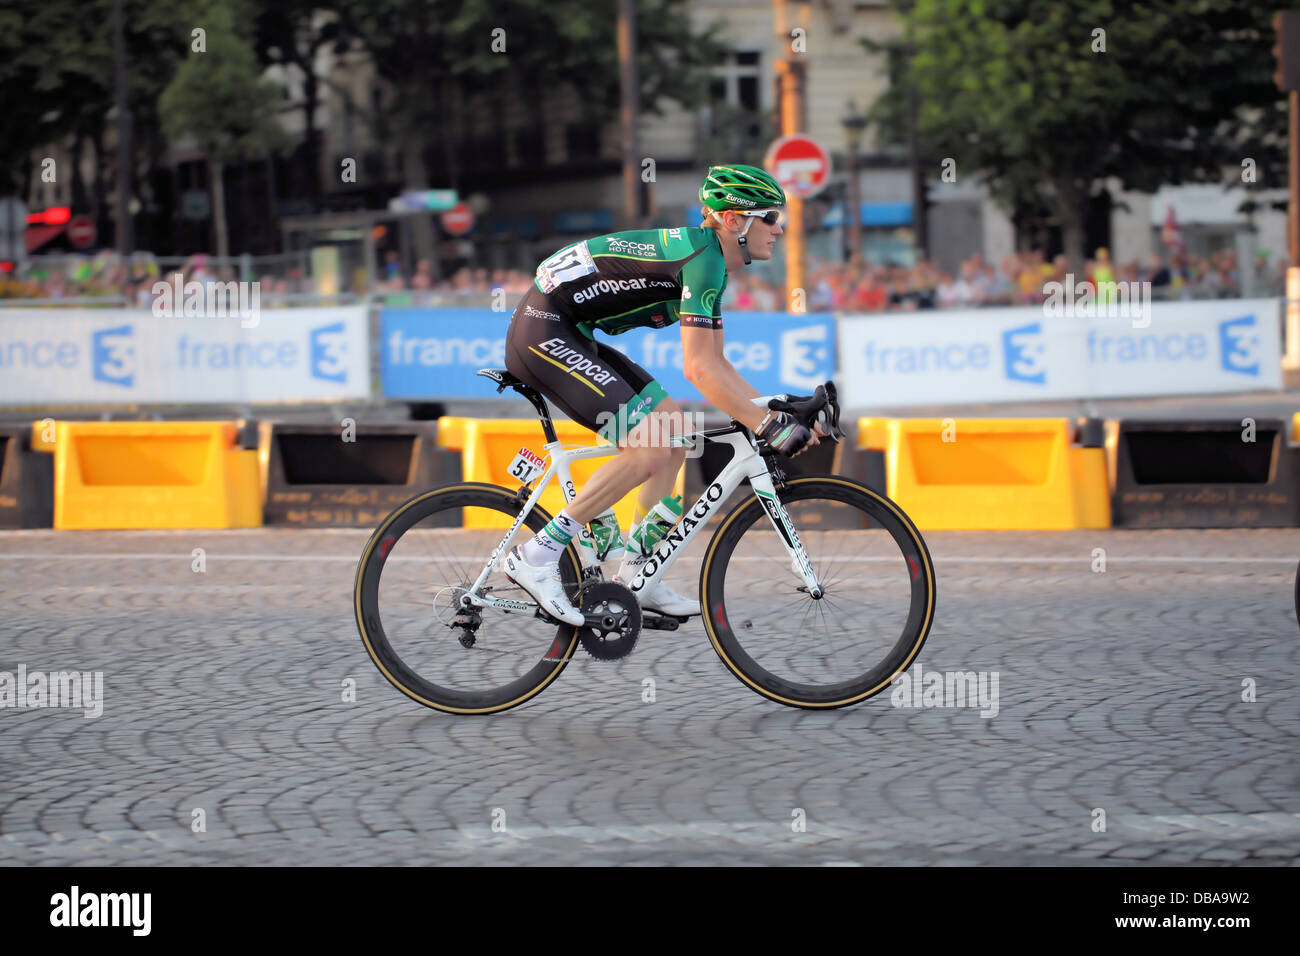 Pierre Roland of Team Europcar, riding the final stage of the 2013 Tour de France on the Champs Elysees, Paris Stock Photo